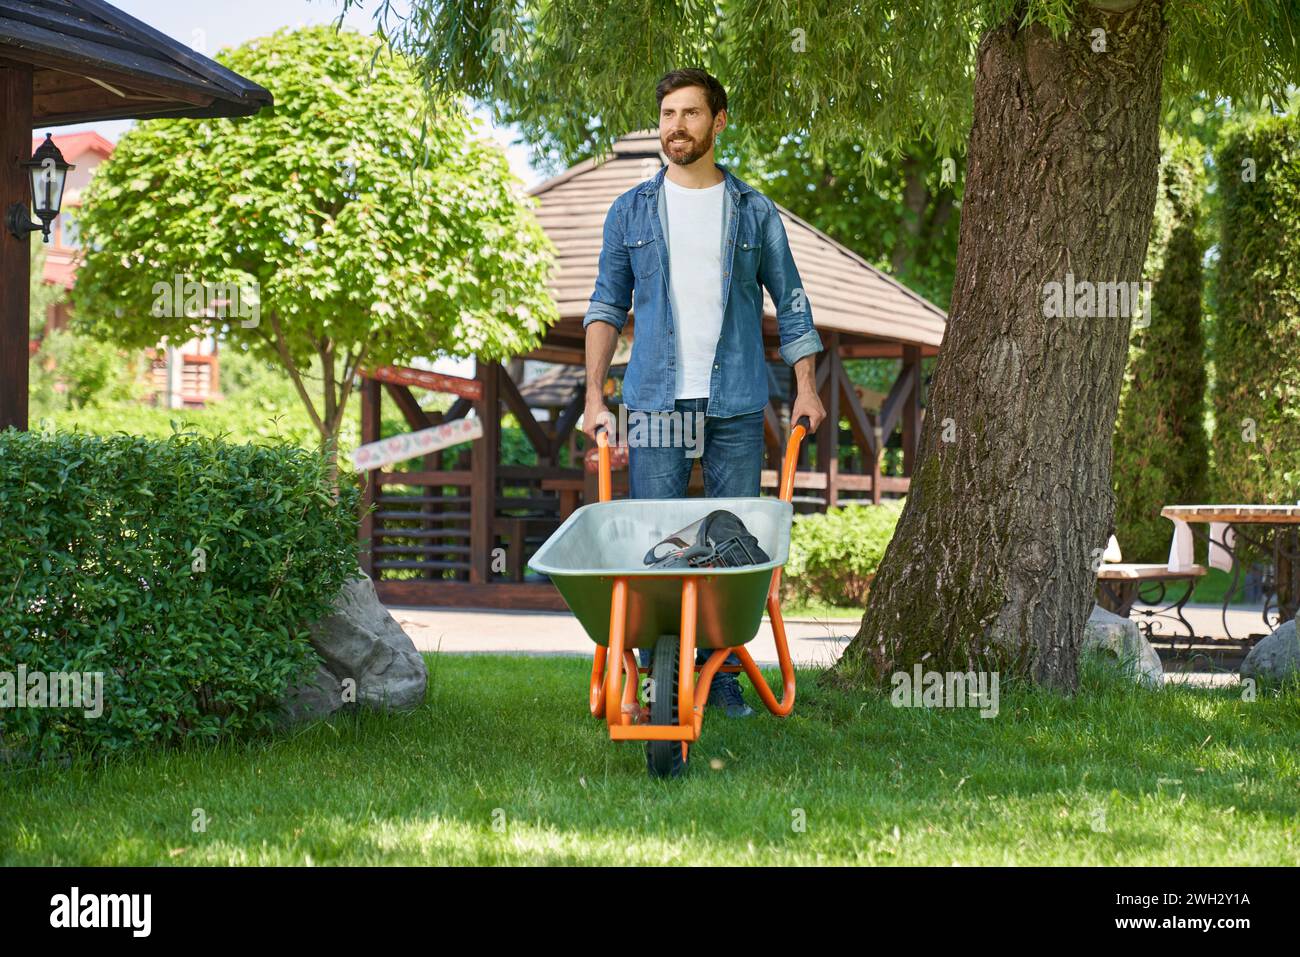 Strong male gardener pushing wheelbarrow, while working in garden in sunny day. Front view of smiling man in denim shirt using cart for farming, while looking into distance. Concept of seasonal work. Stock Photo